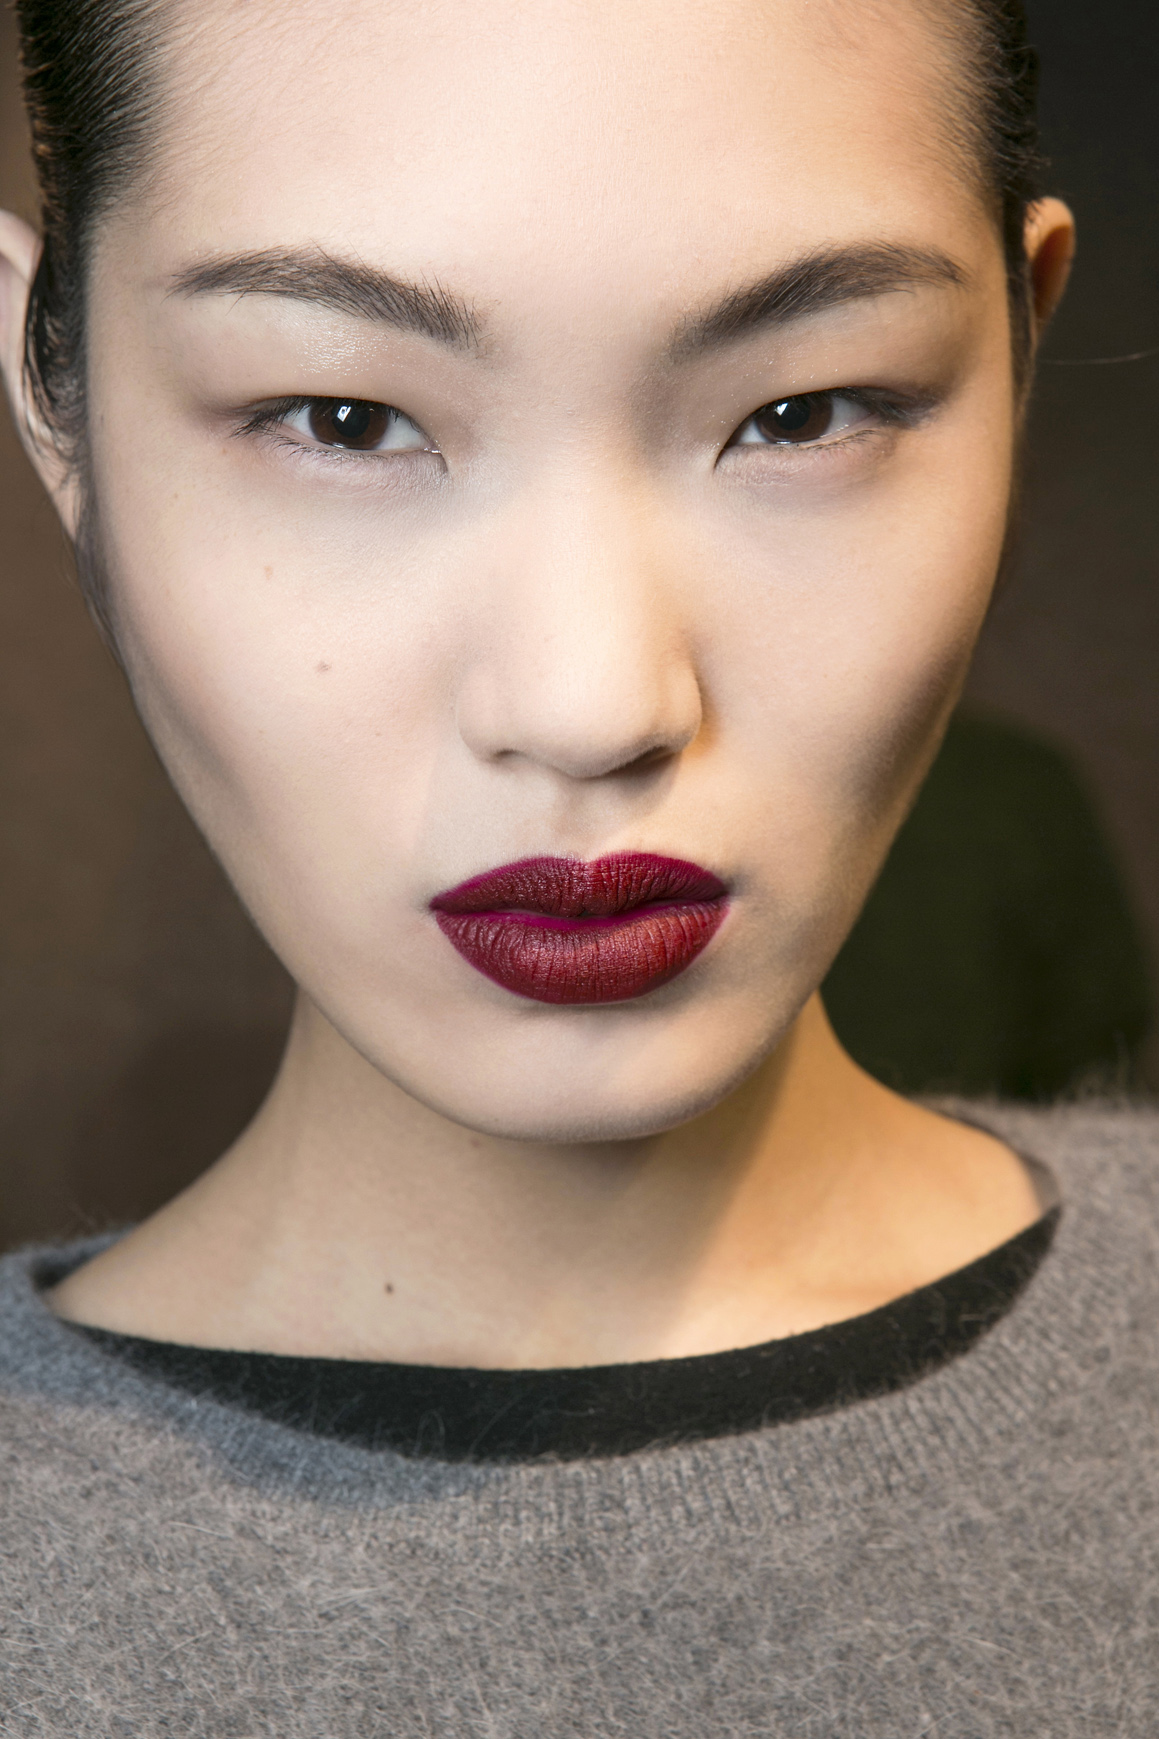 The Matte Makeup Tips You Need for Fall | StyleCaster